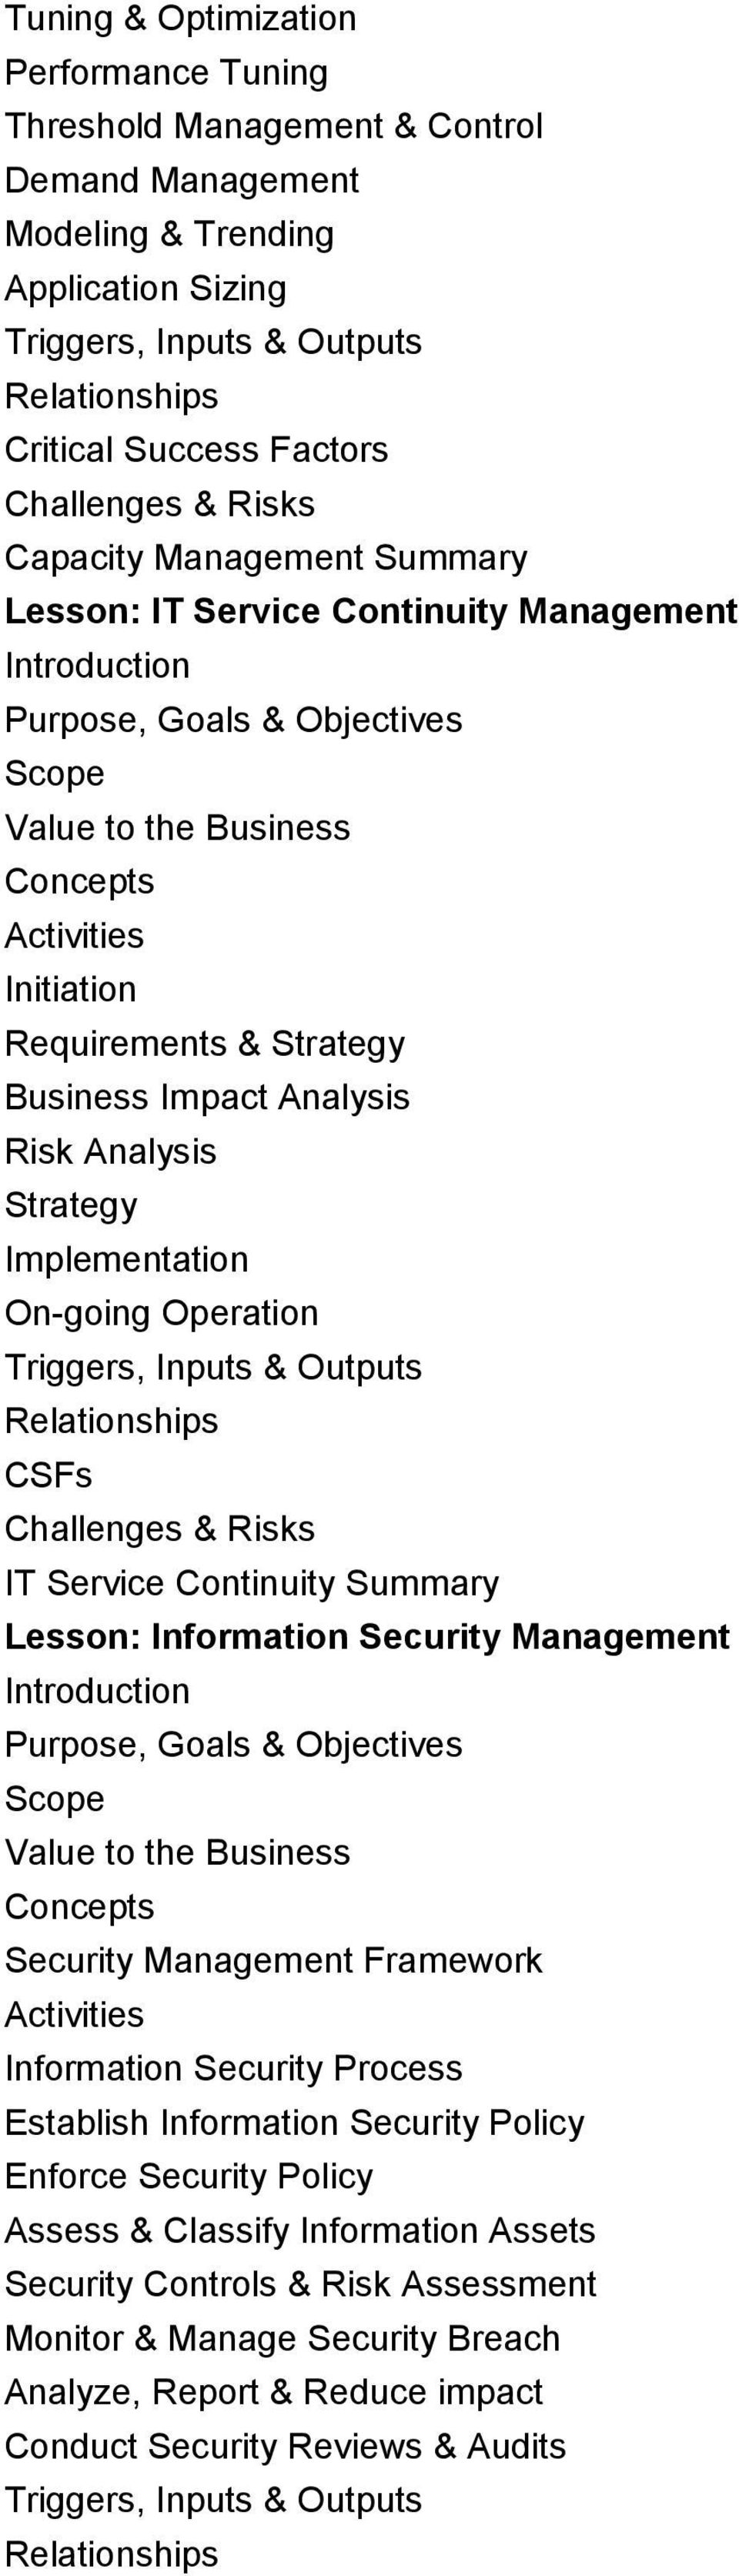 Continuity Summary Lesson: Information Security Management Security Management Framework Information Security Process Establish Information Security Policy Enforce